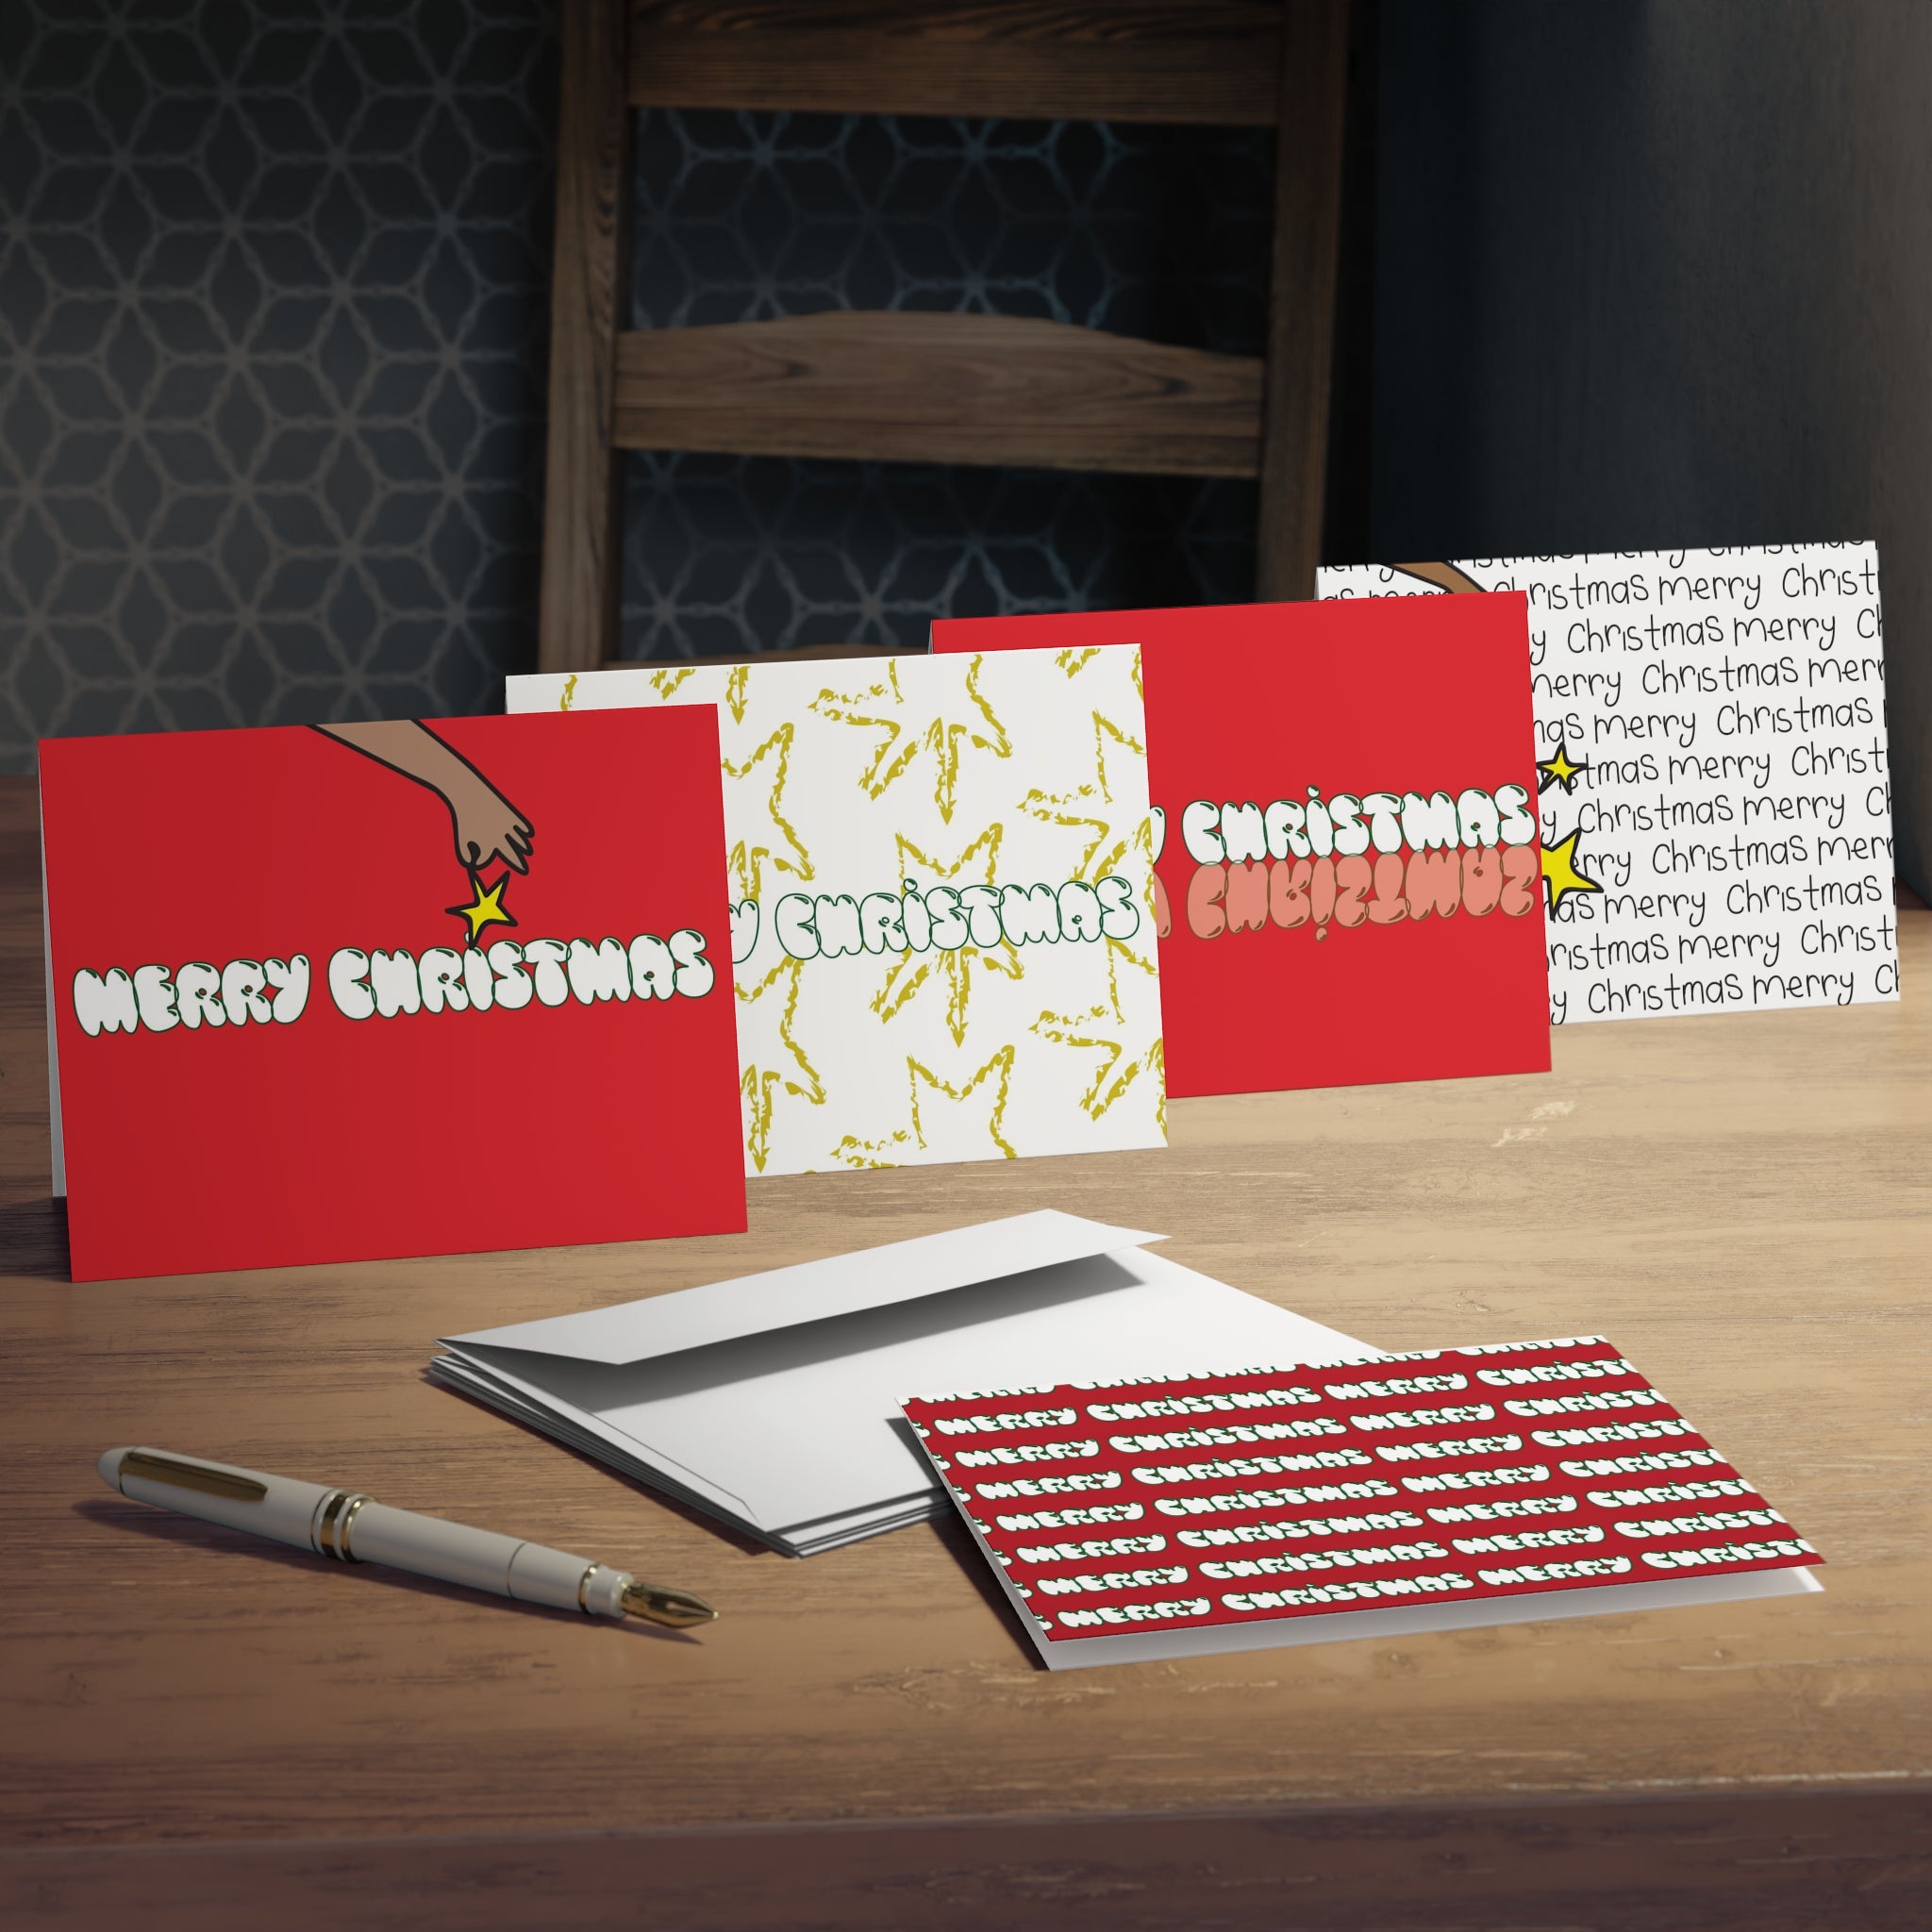 Bubble Christmas Cards (5-Pack)